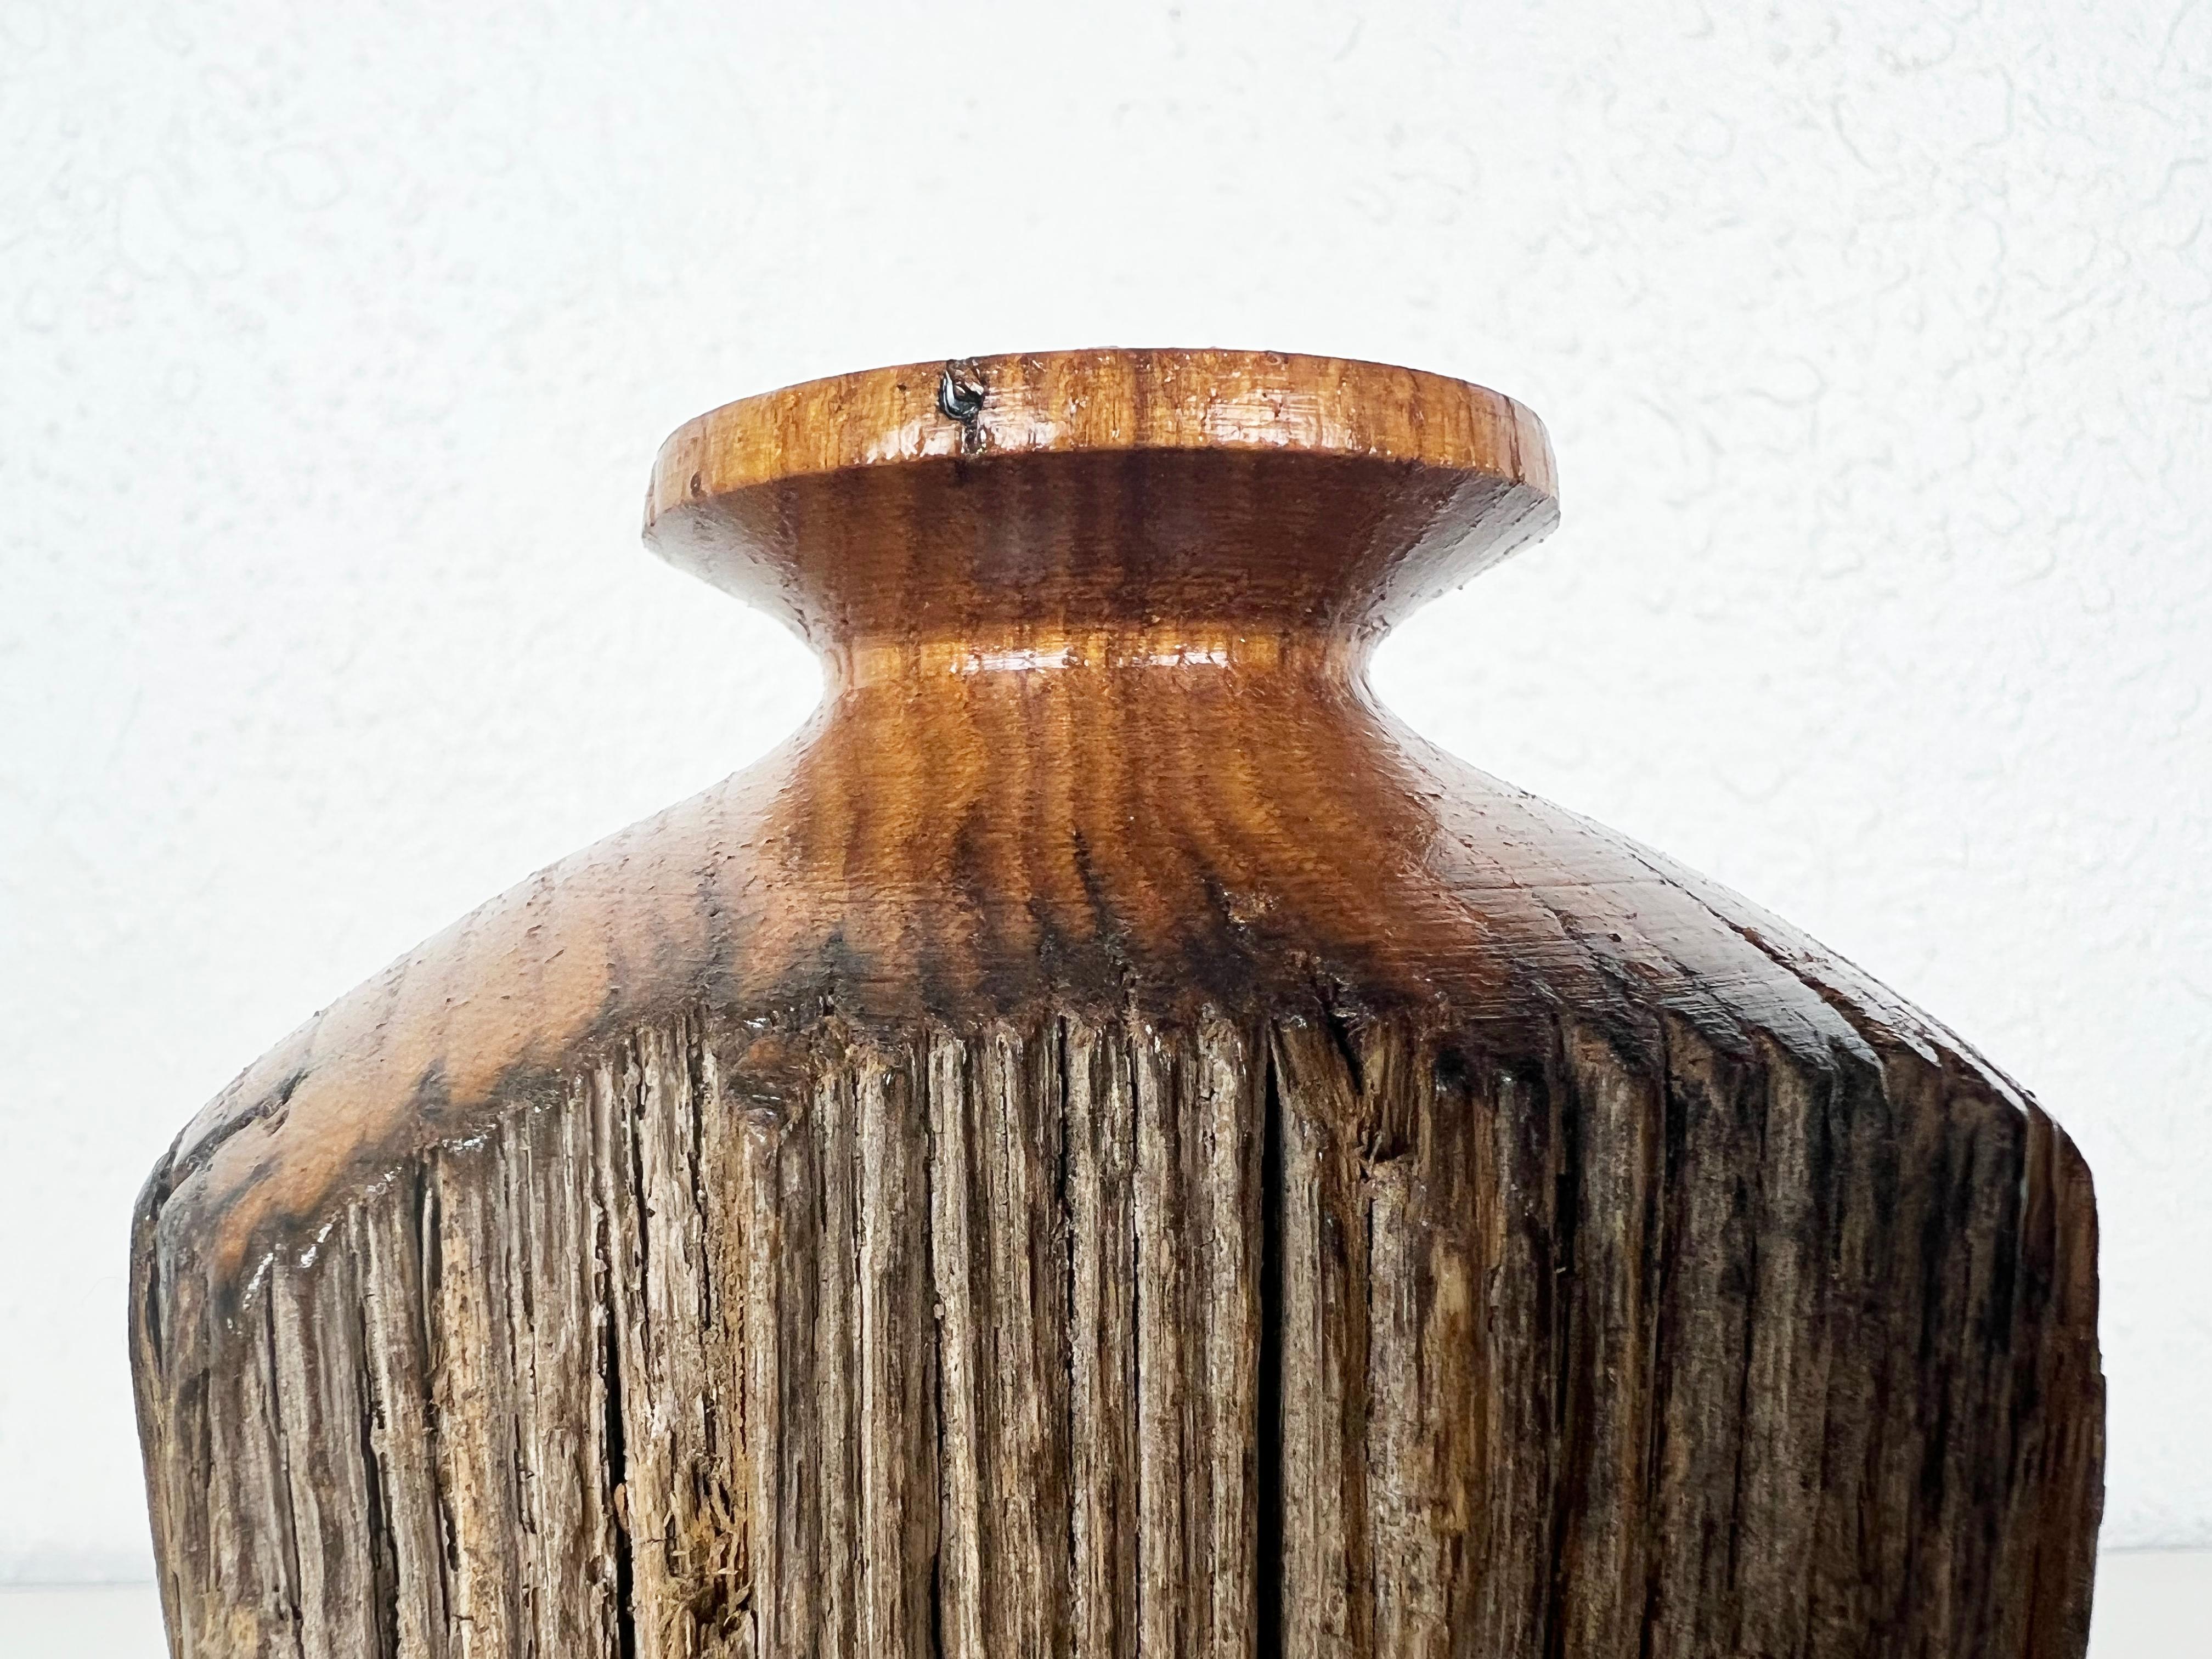 Vintage unique handmade wooden weedpot vase with raw live edge detail and a finished hand-turned top by and unknown maker.